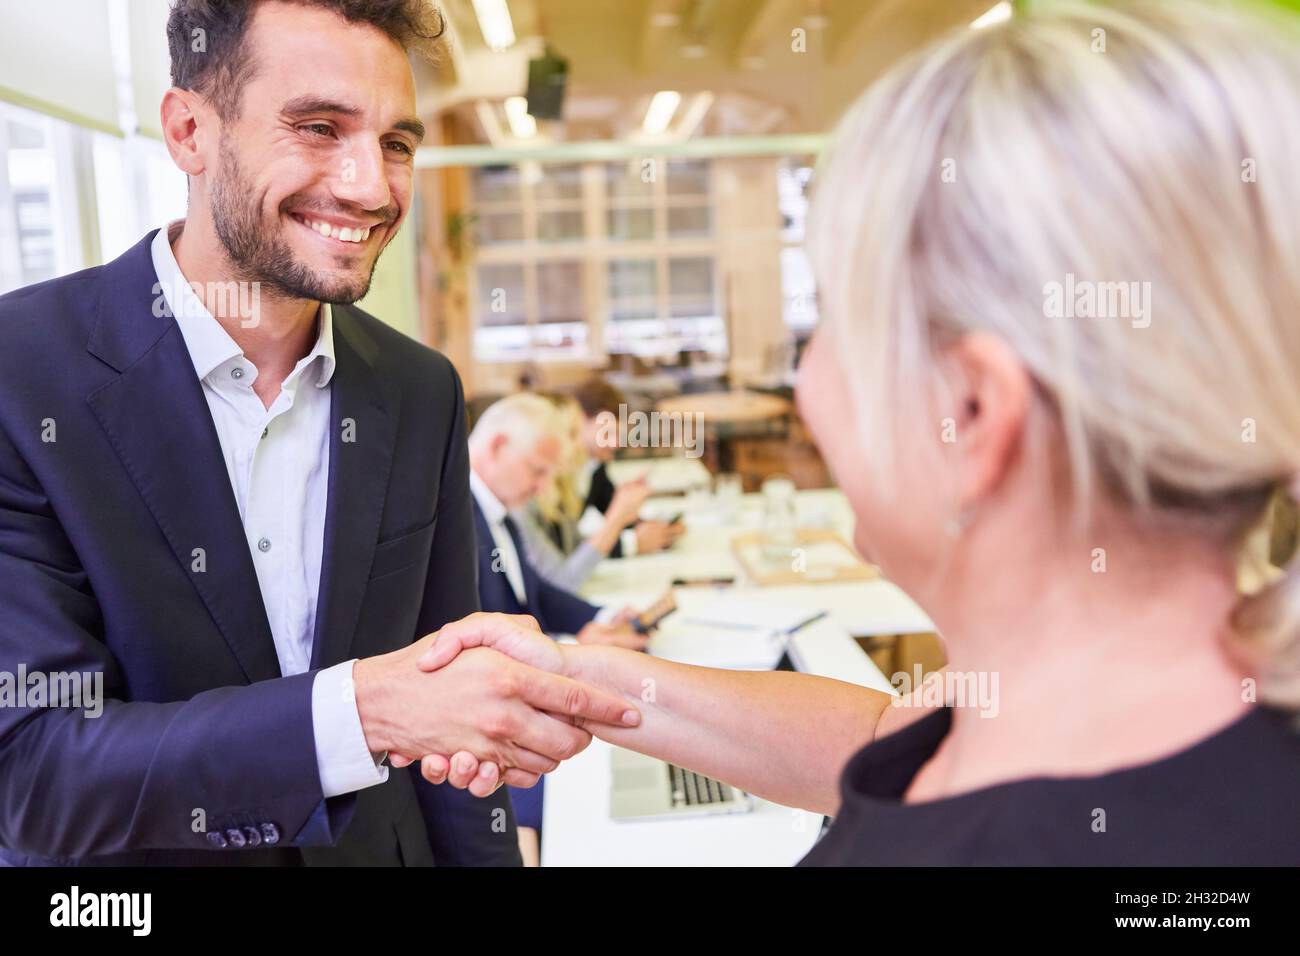 Business people shaking hands as a congratulation for a promotion or greeting Stock Photo